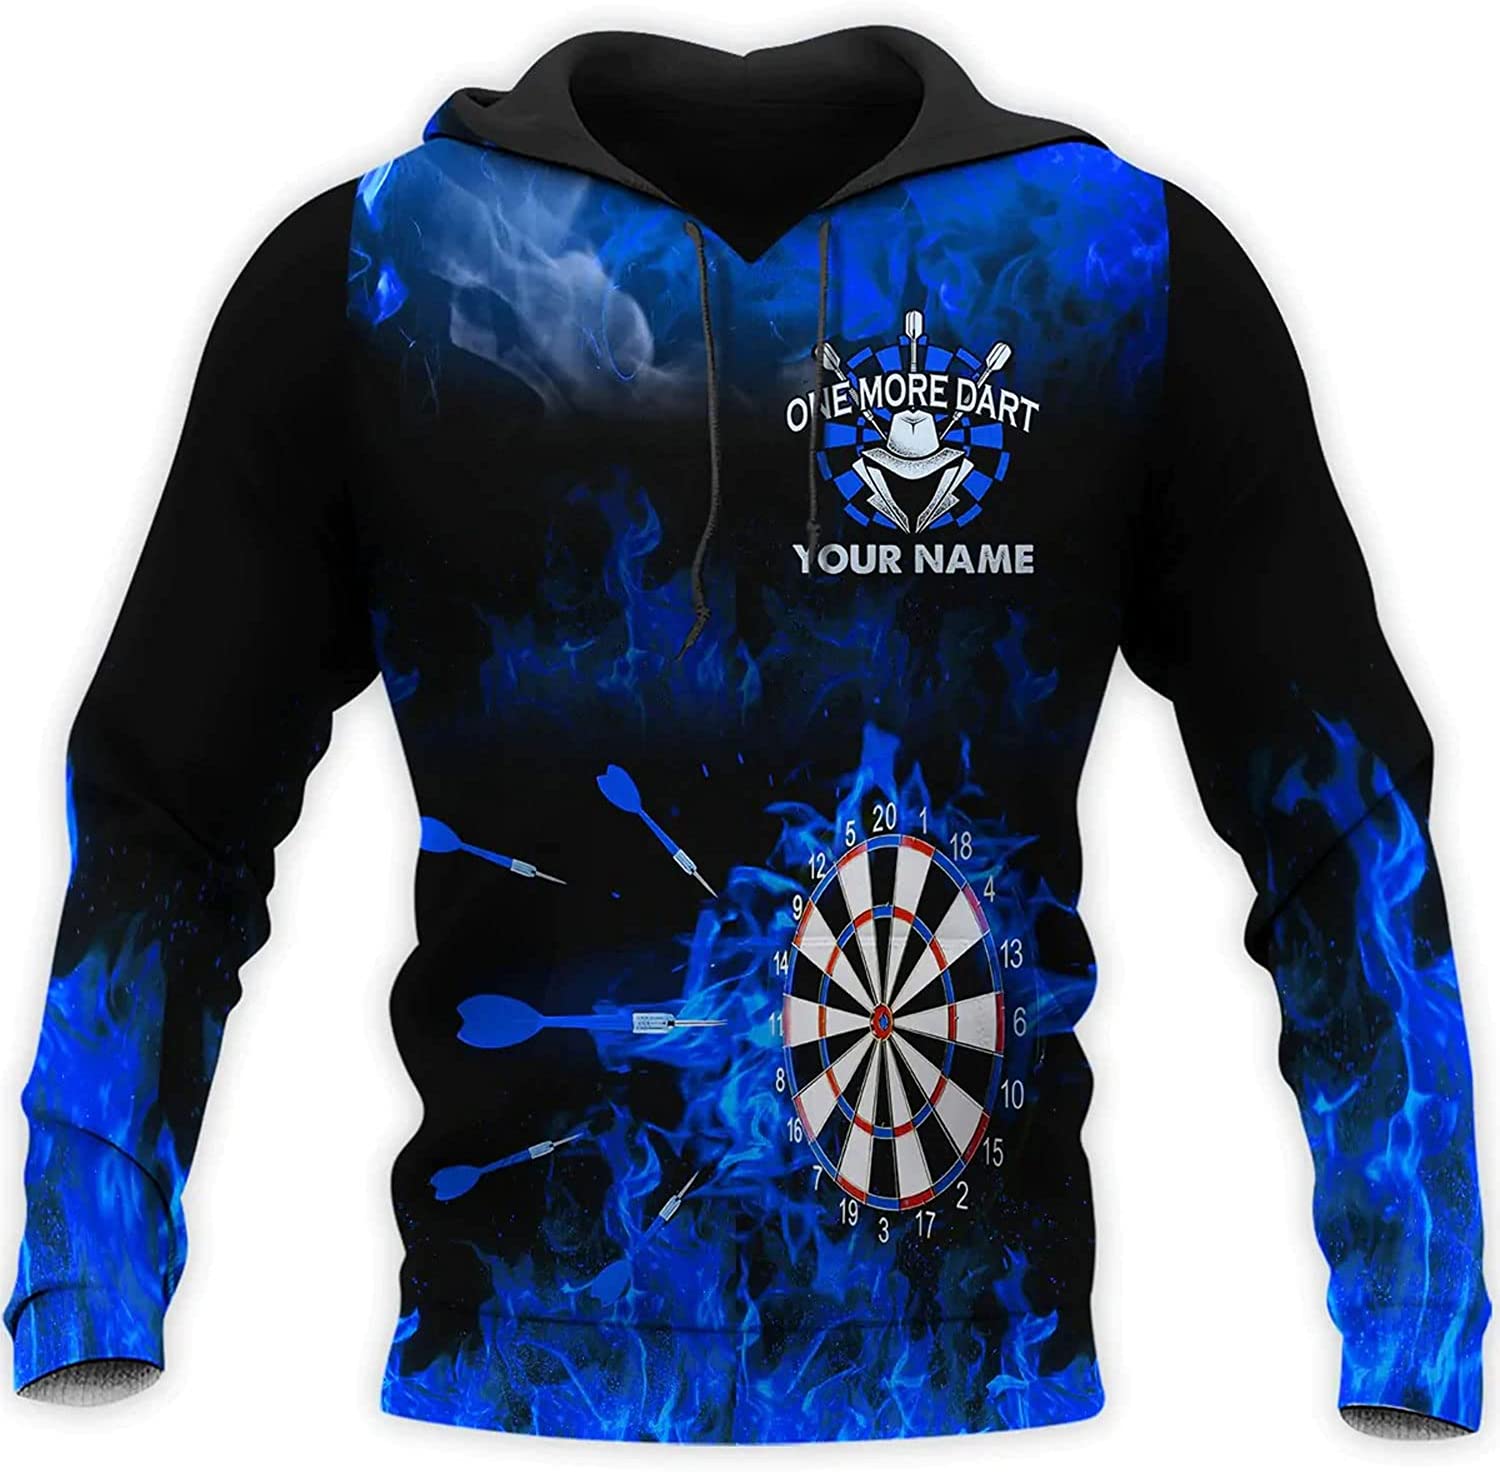 Multicolored Winter Darts 3D Printed Apparel with Personalized Name for Darts Enthusiasts: T-Shirt, Hawaiian Shirt, Sweatshirt, and Zip Hoodie – Perfect Gift for Darts Lovers. – JOT1515